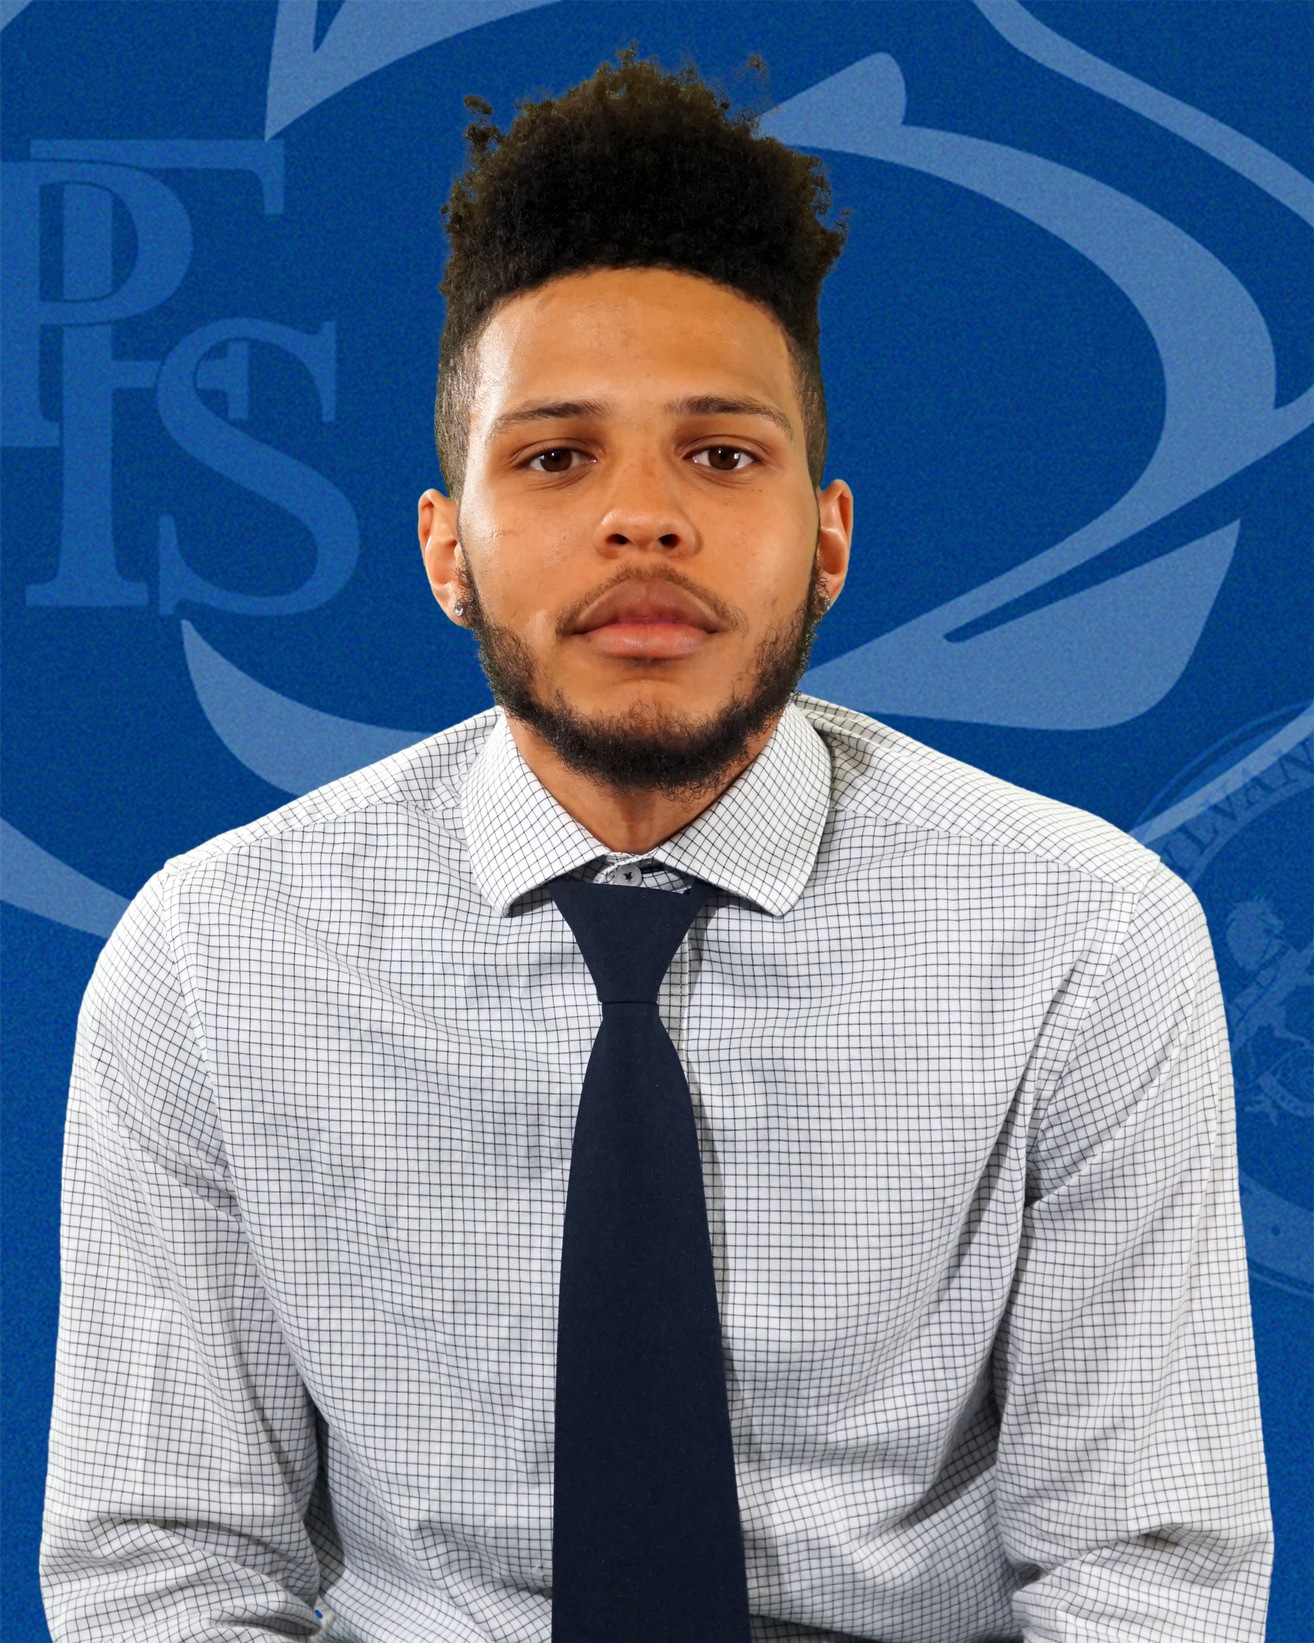 Hoxie wins USCAA and PSUAC Men's Basketball Player of the Week